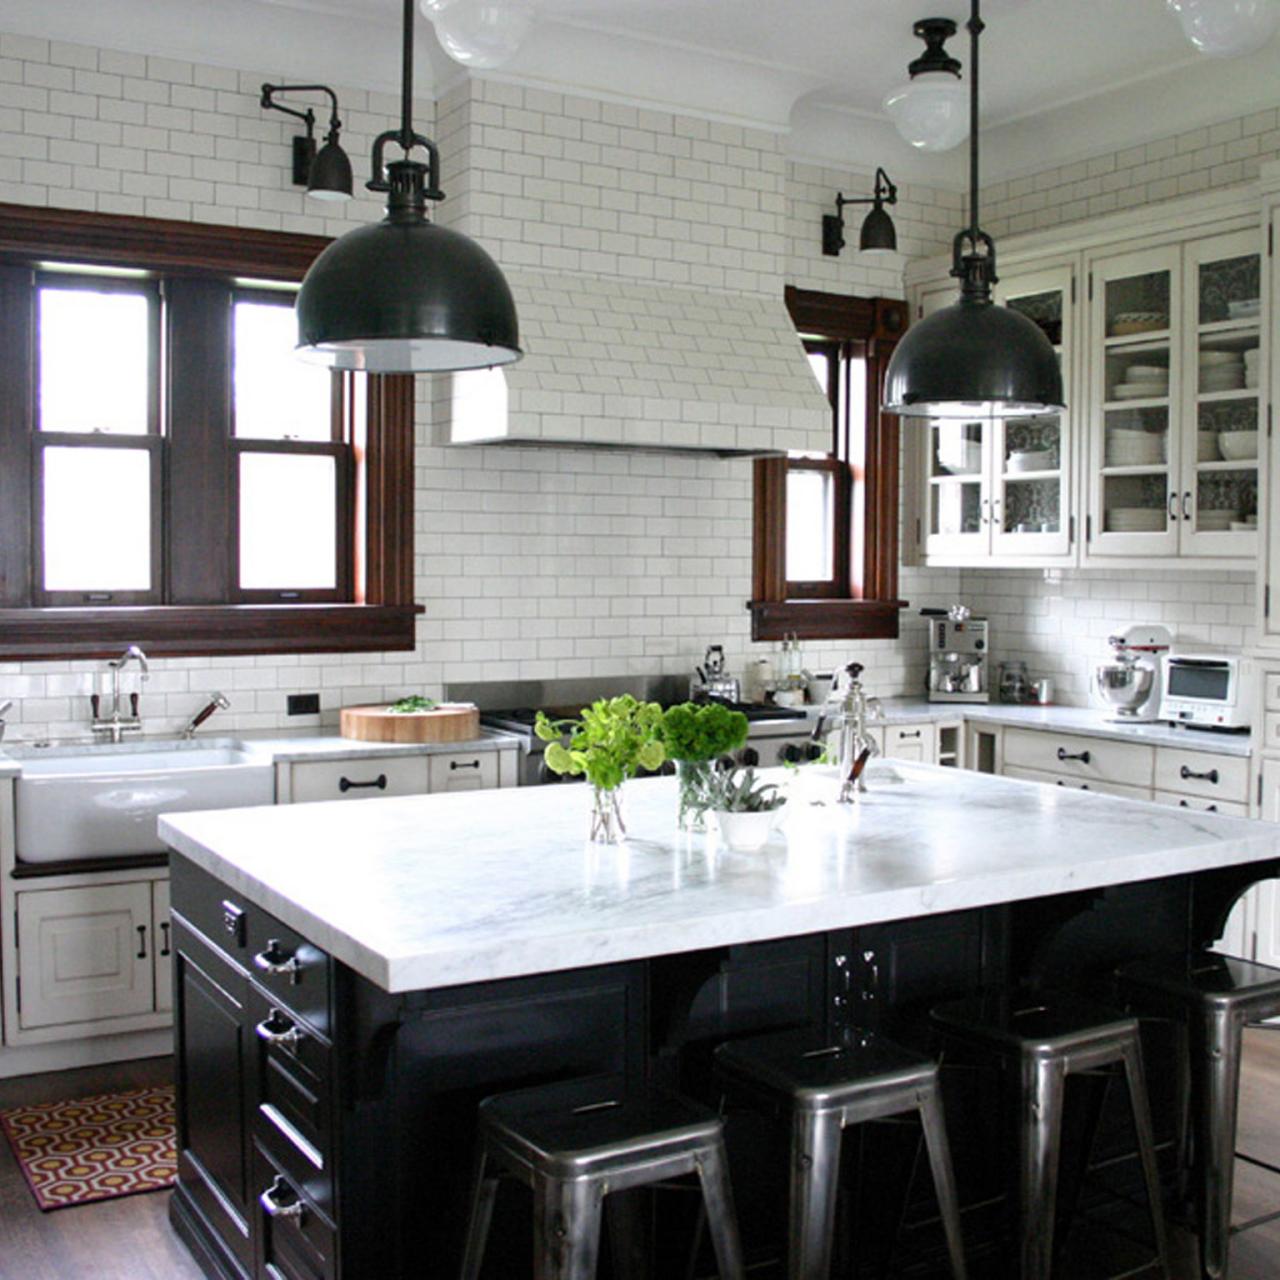 Our Favorite Black and White Kitchens on Instagram